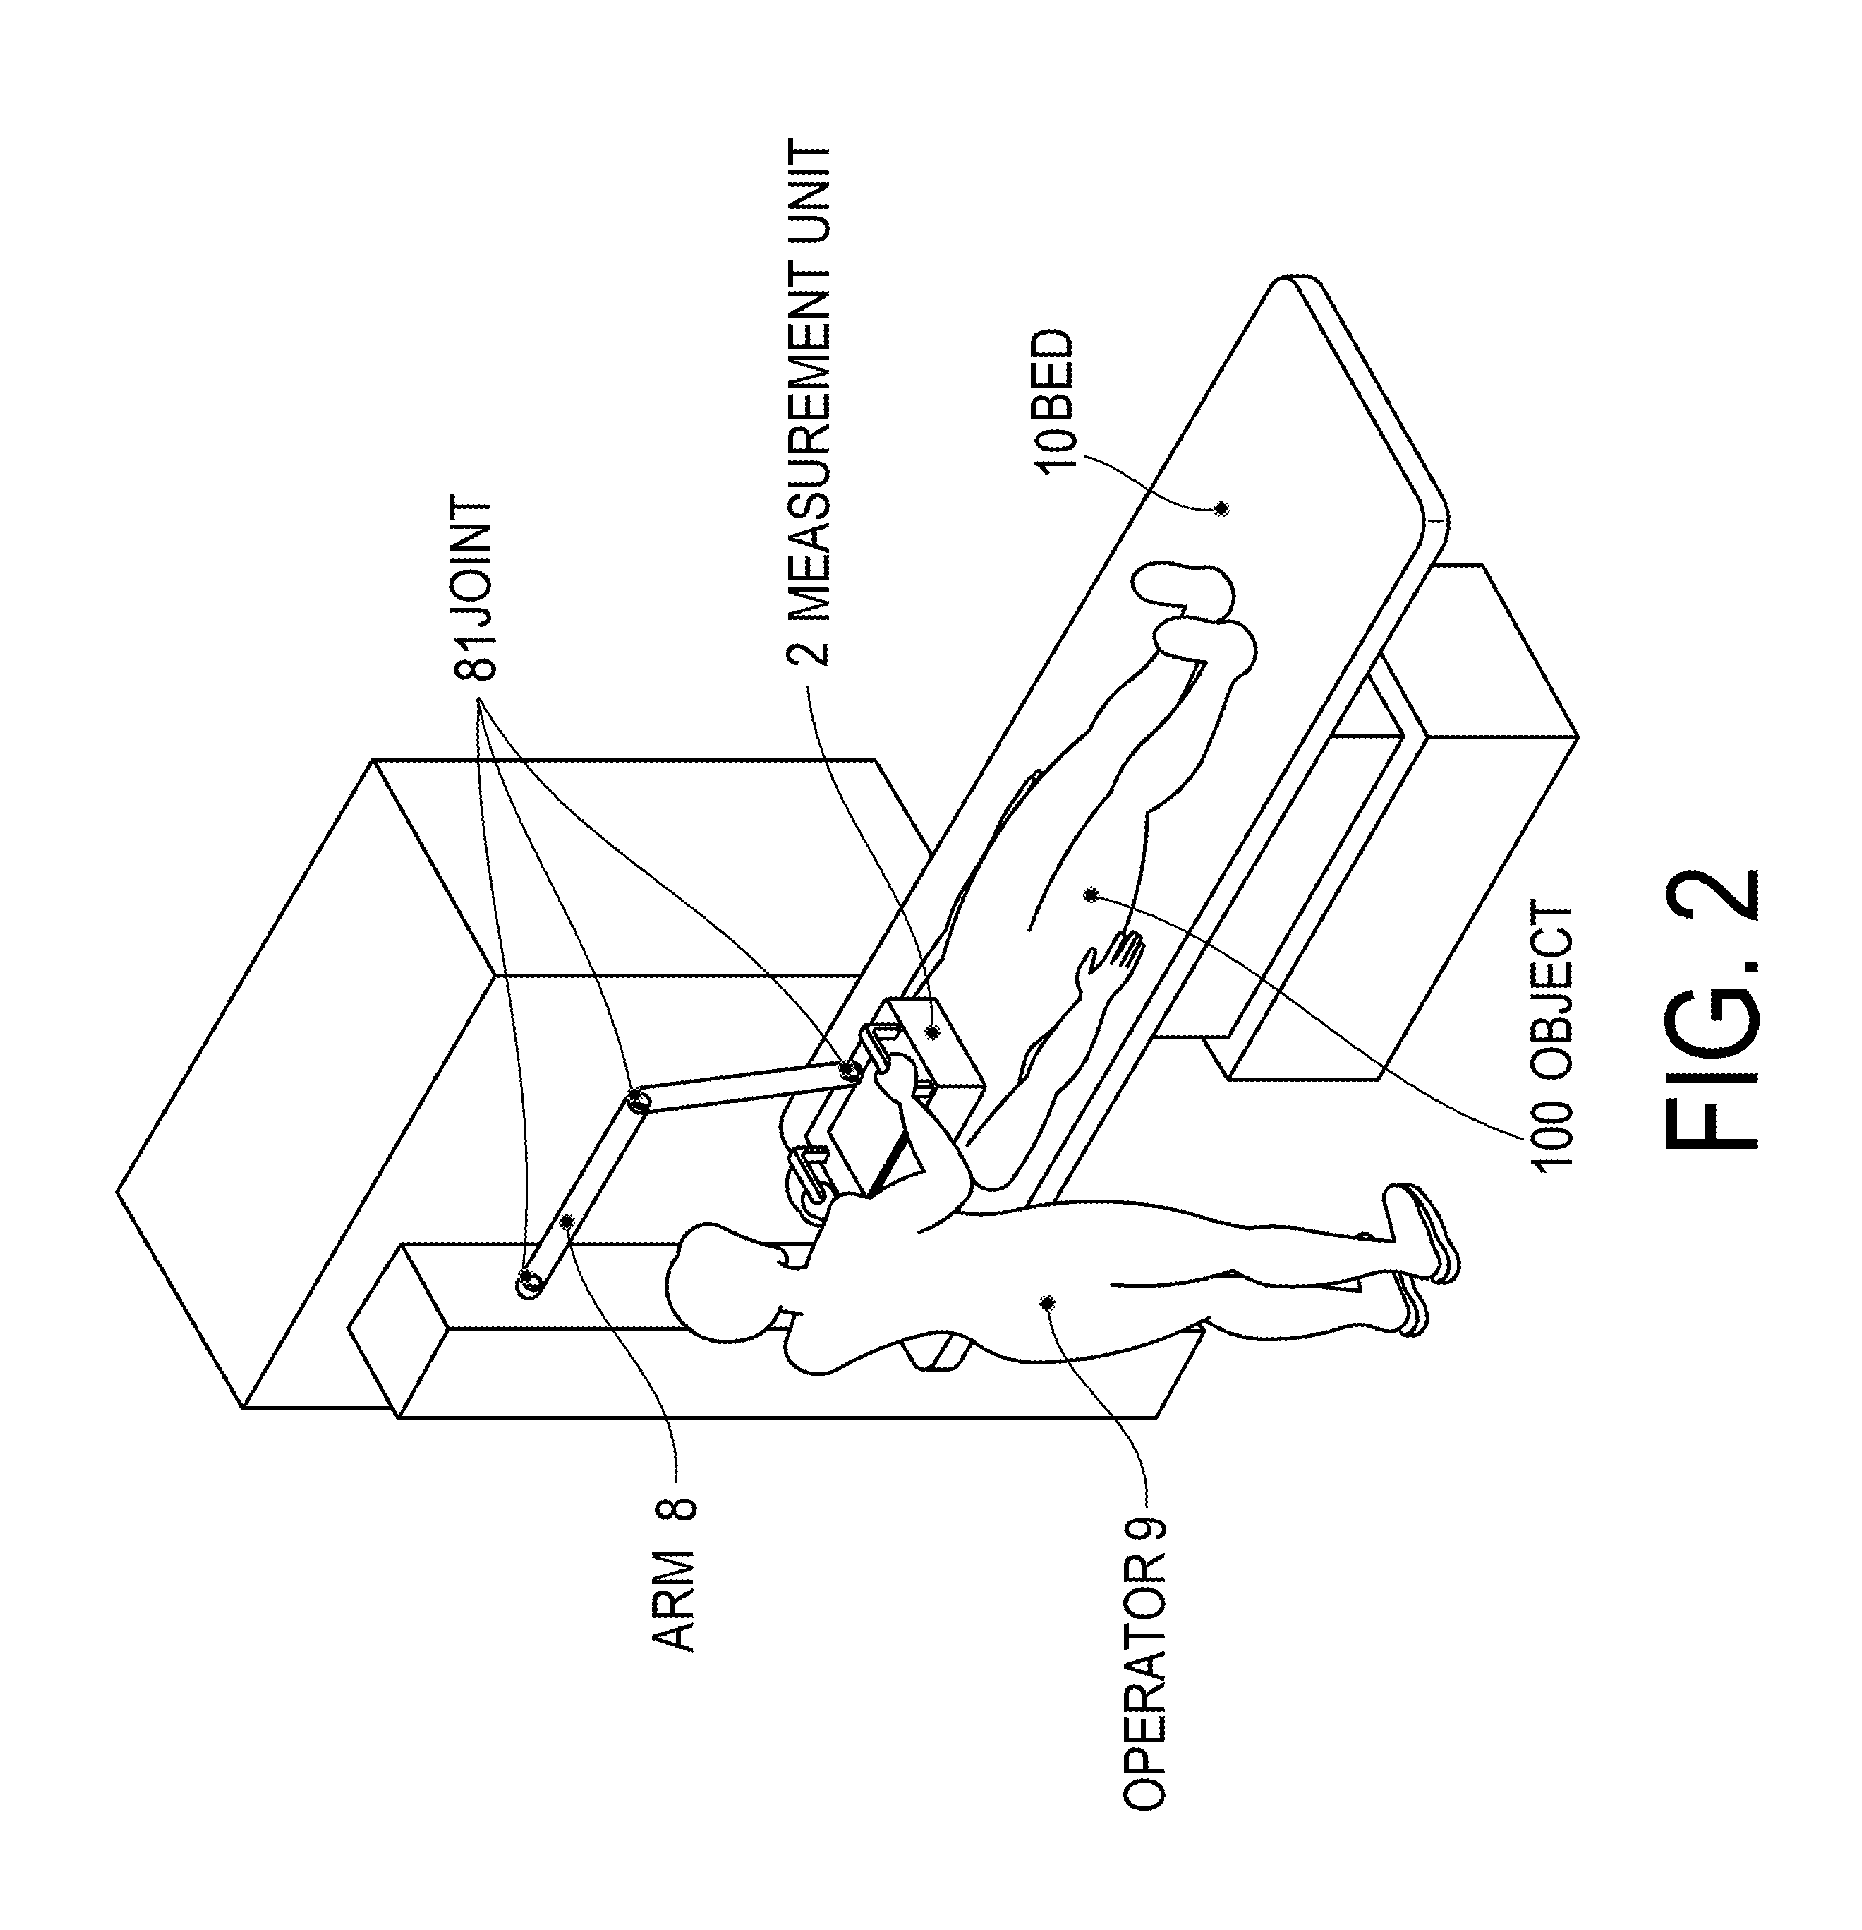 Object information acquiring apparatus and breast examination apparatus